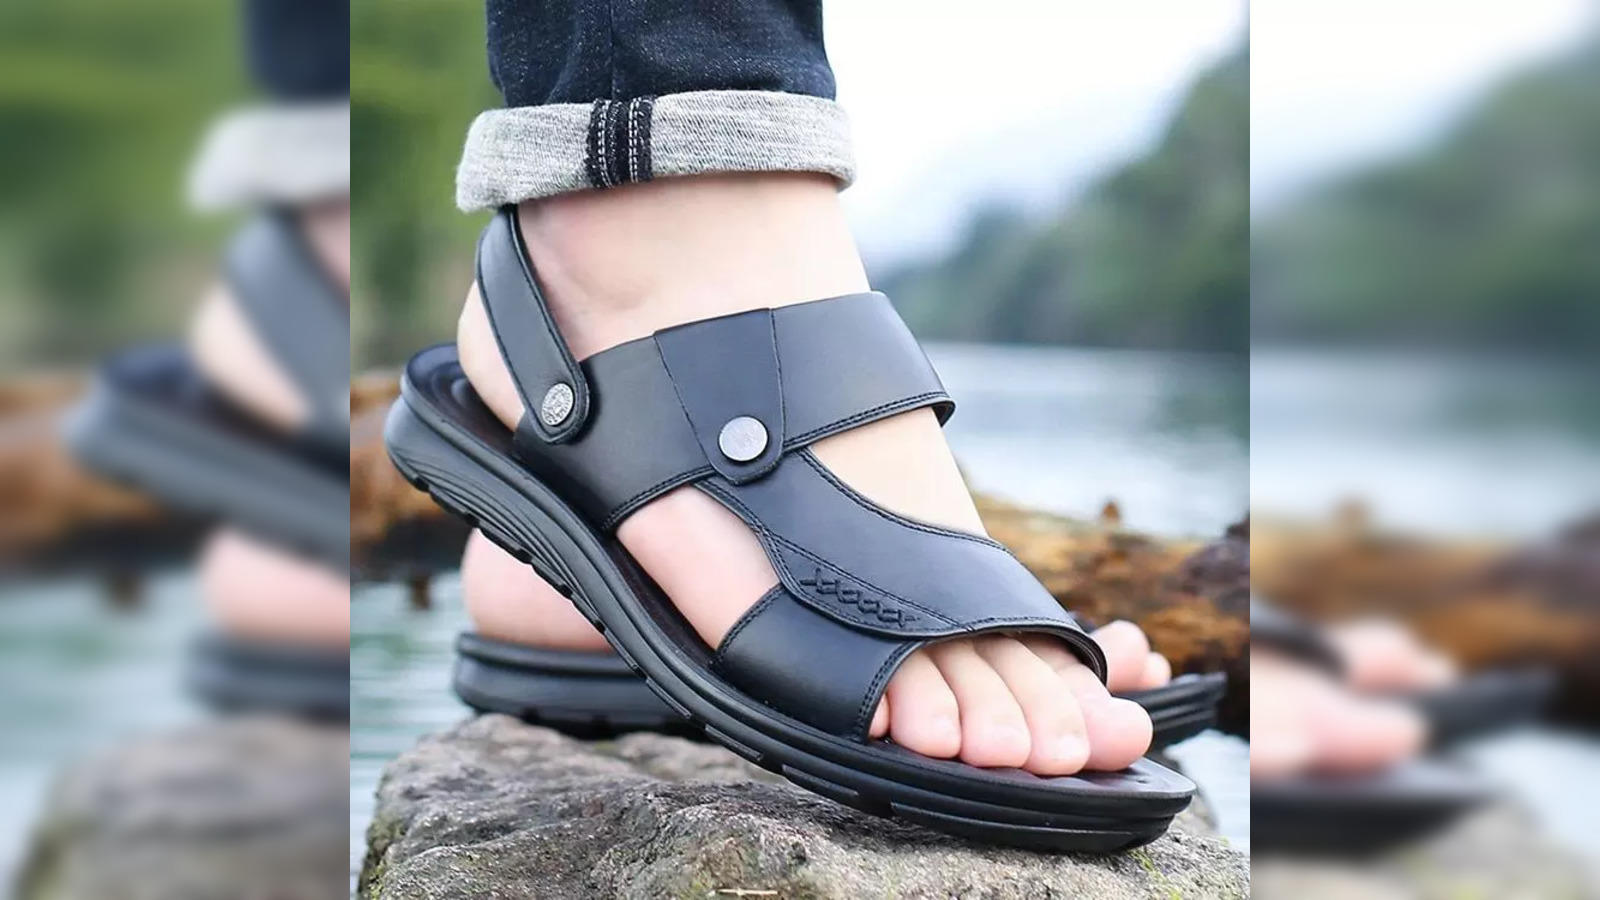 ZuZu Sandals Review: Minimalist Hiking Sandals with Upcycled Soles